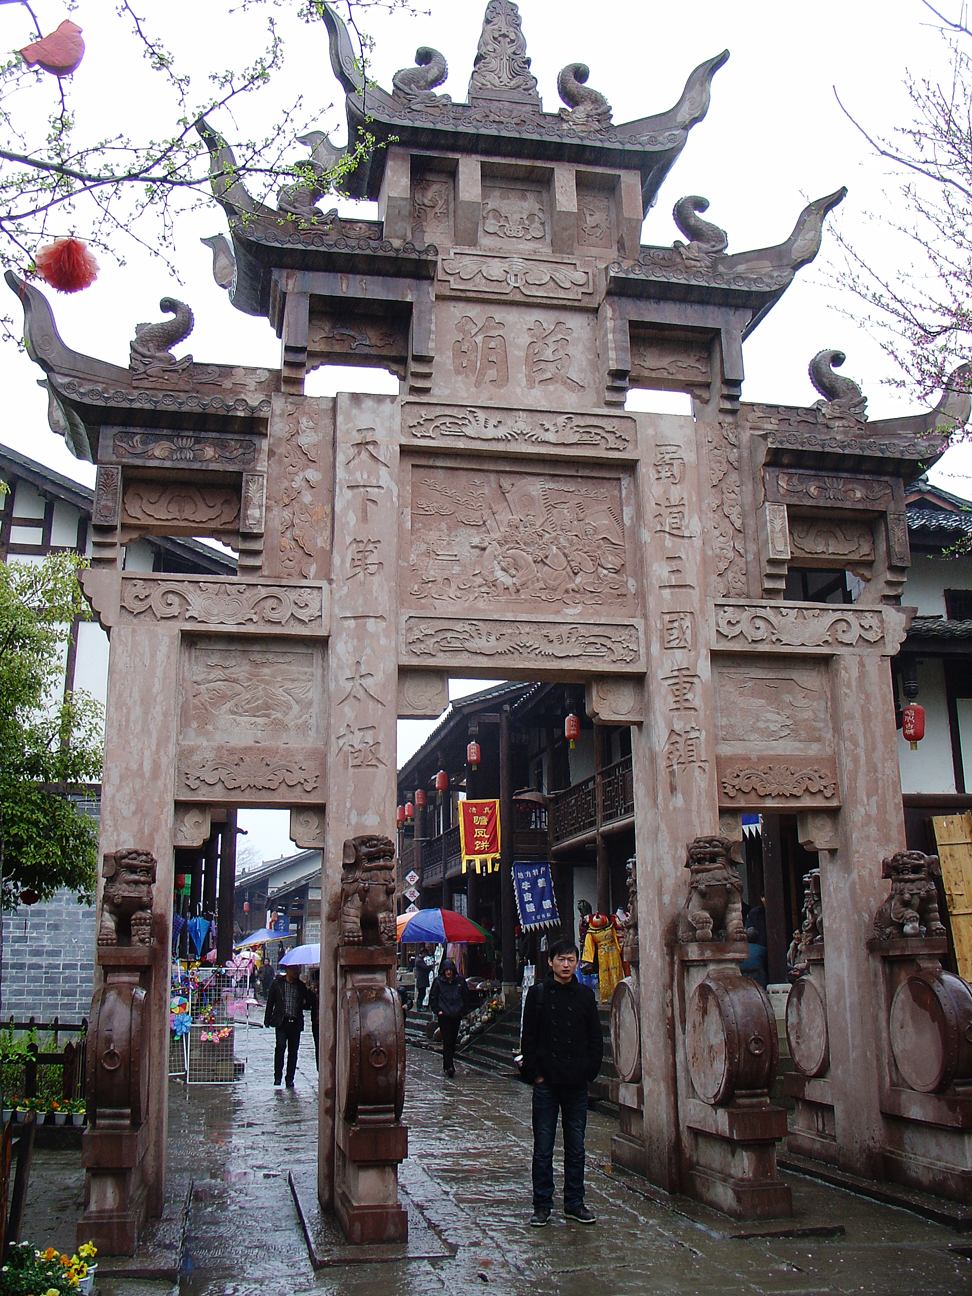 The entrance gate of Maobaxiang - The whole village has been rebuilt in the traditional style.